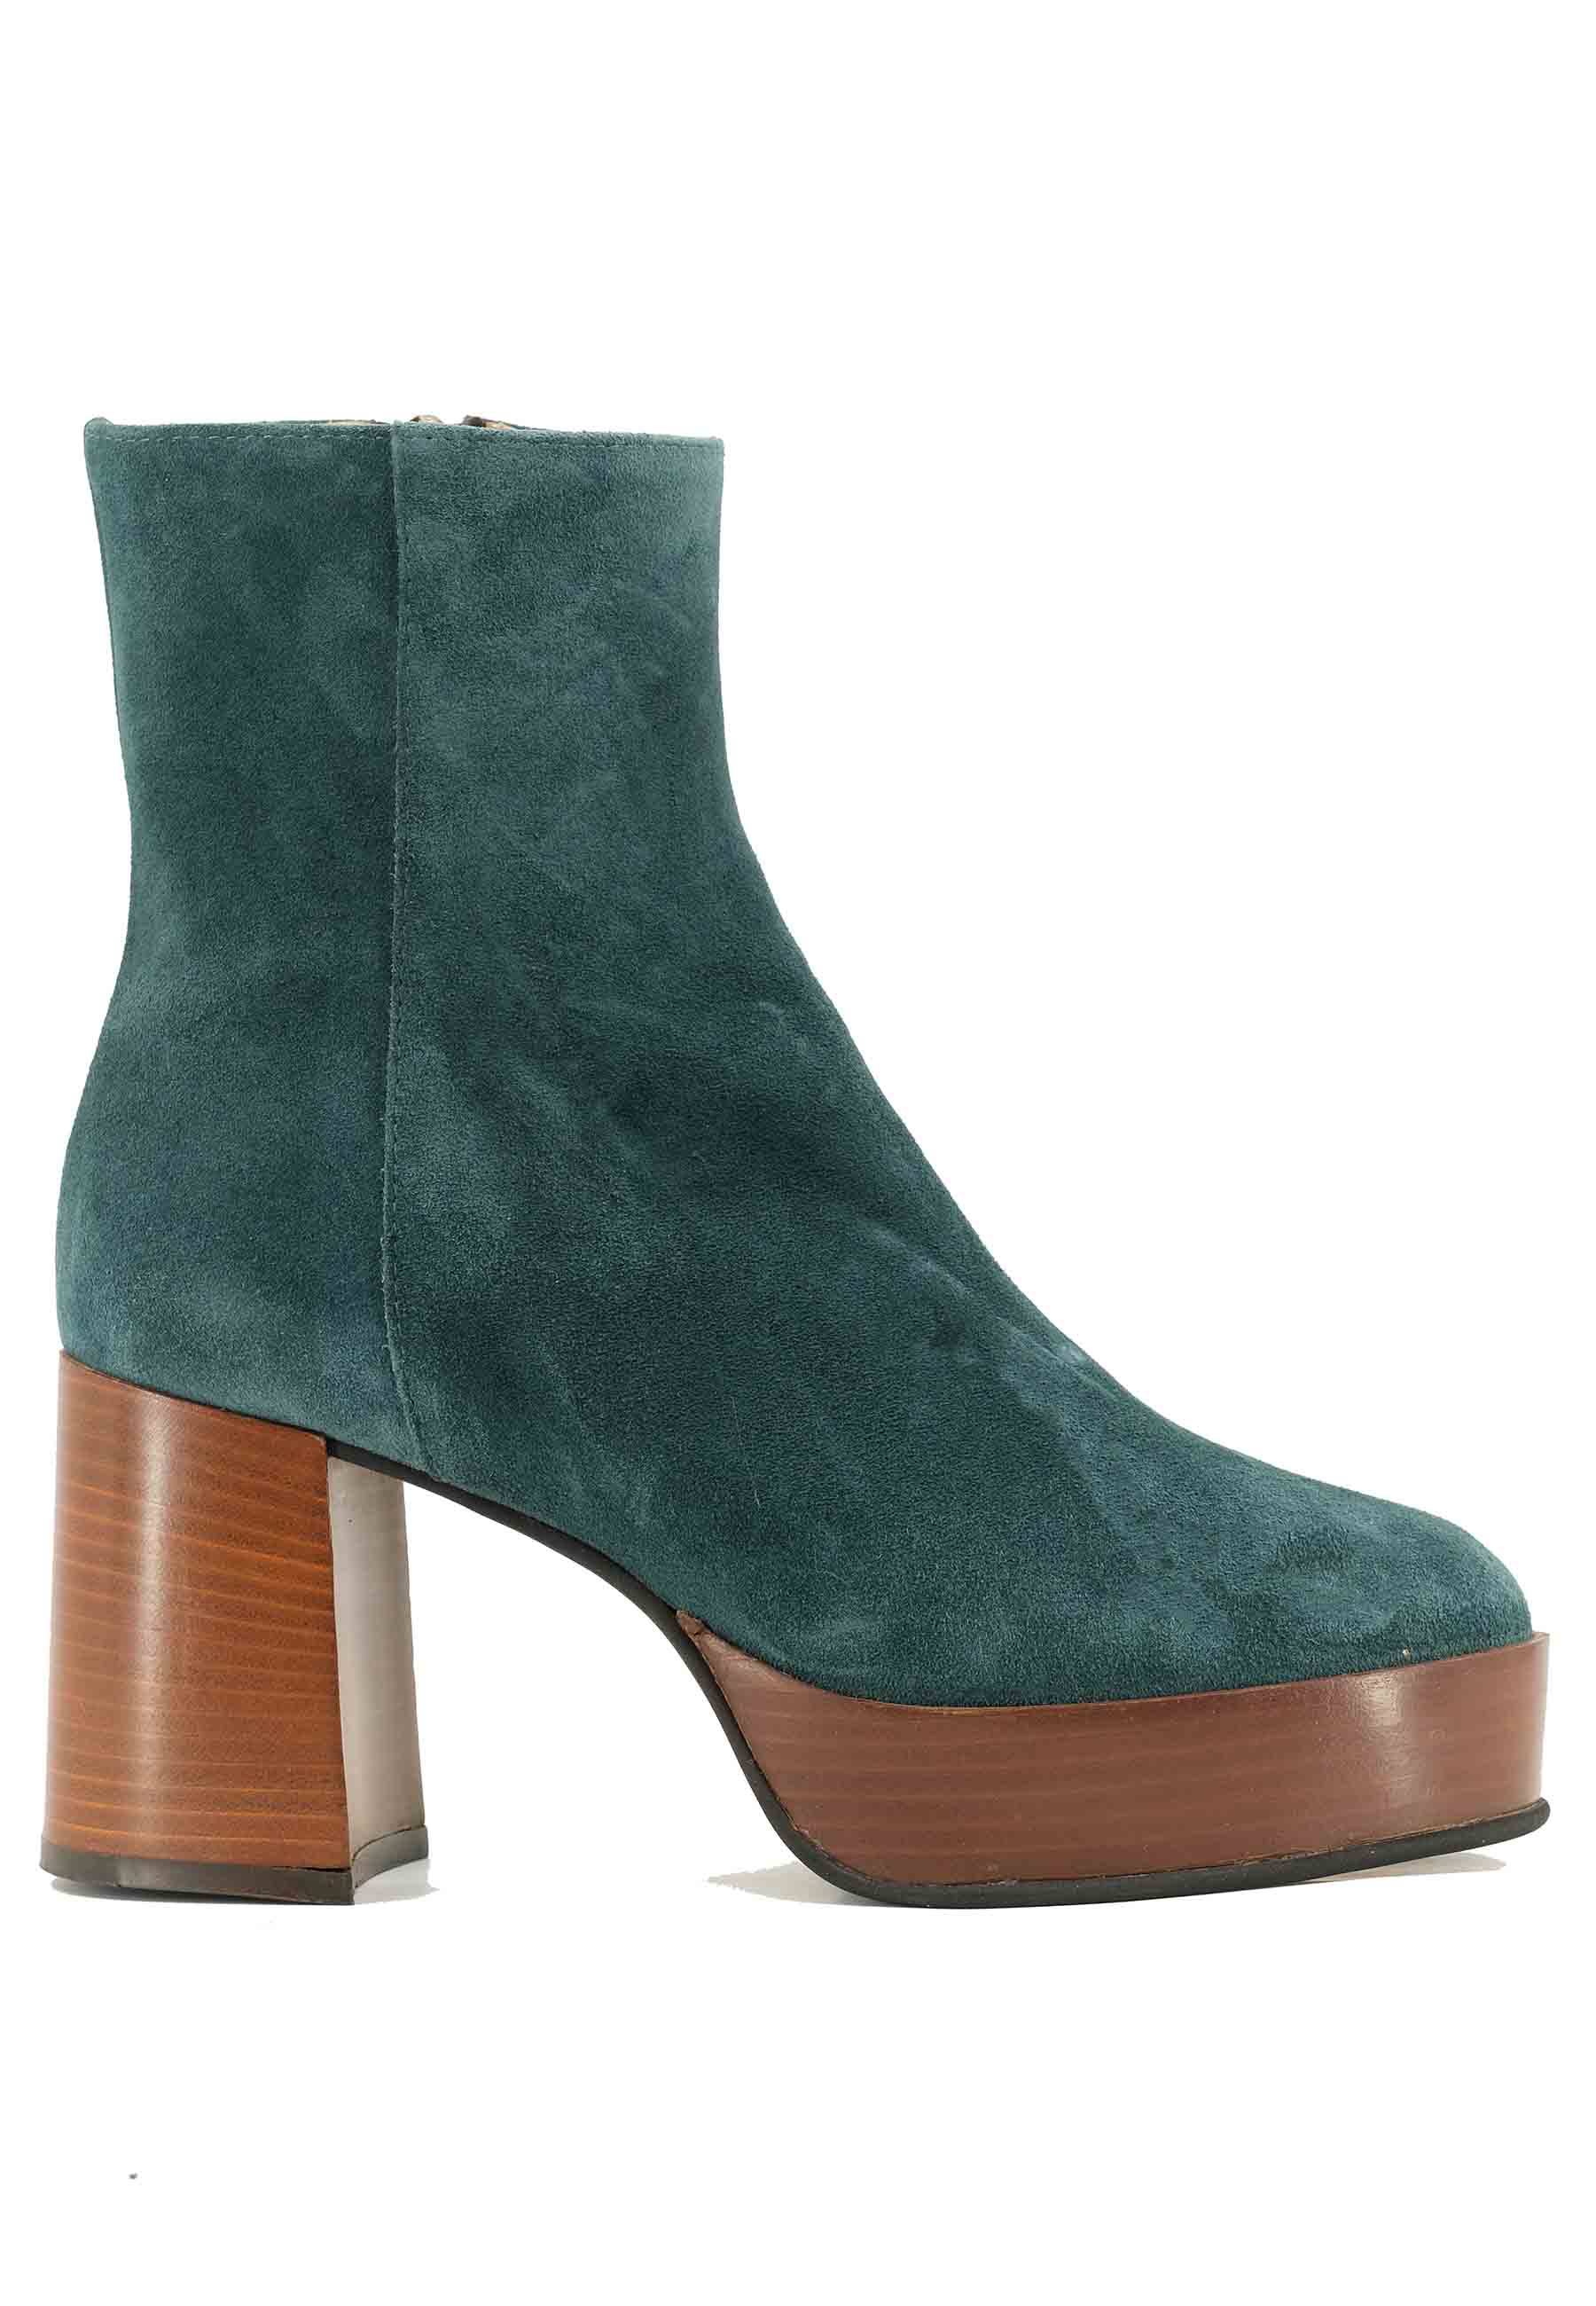 TR1556 ankle boots in petrol green suede with high heel and platform with side zip closure